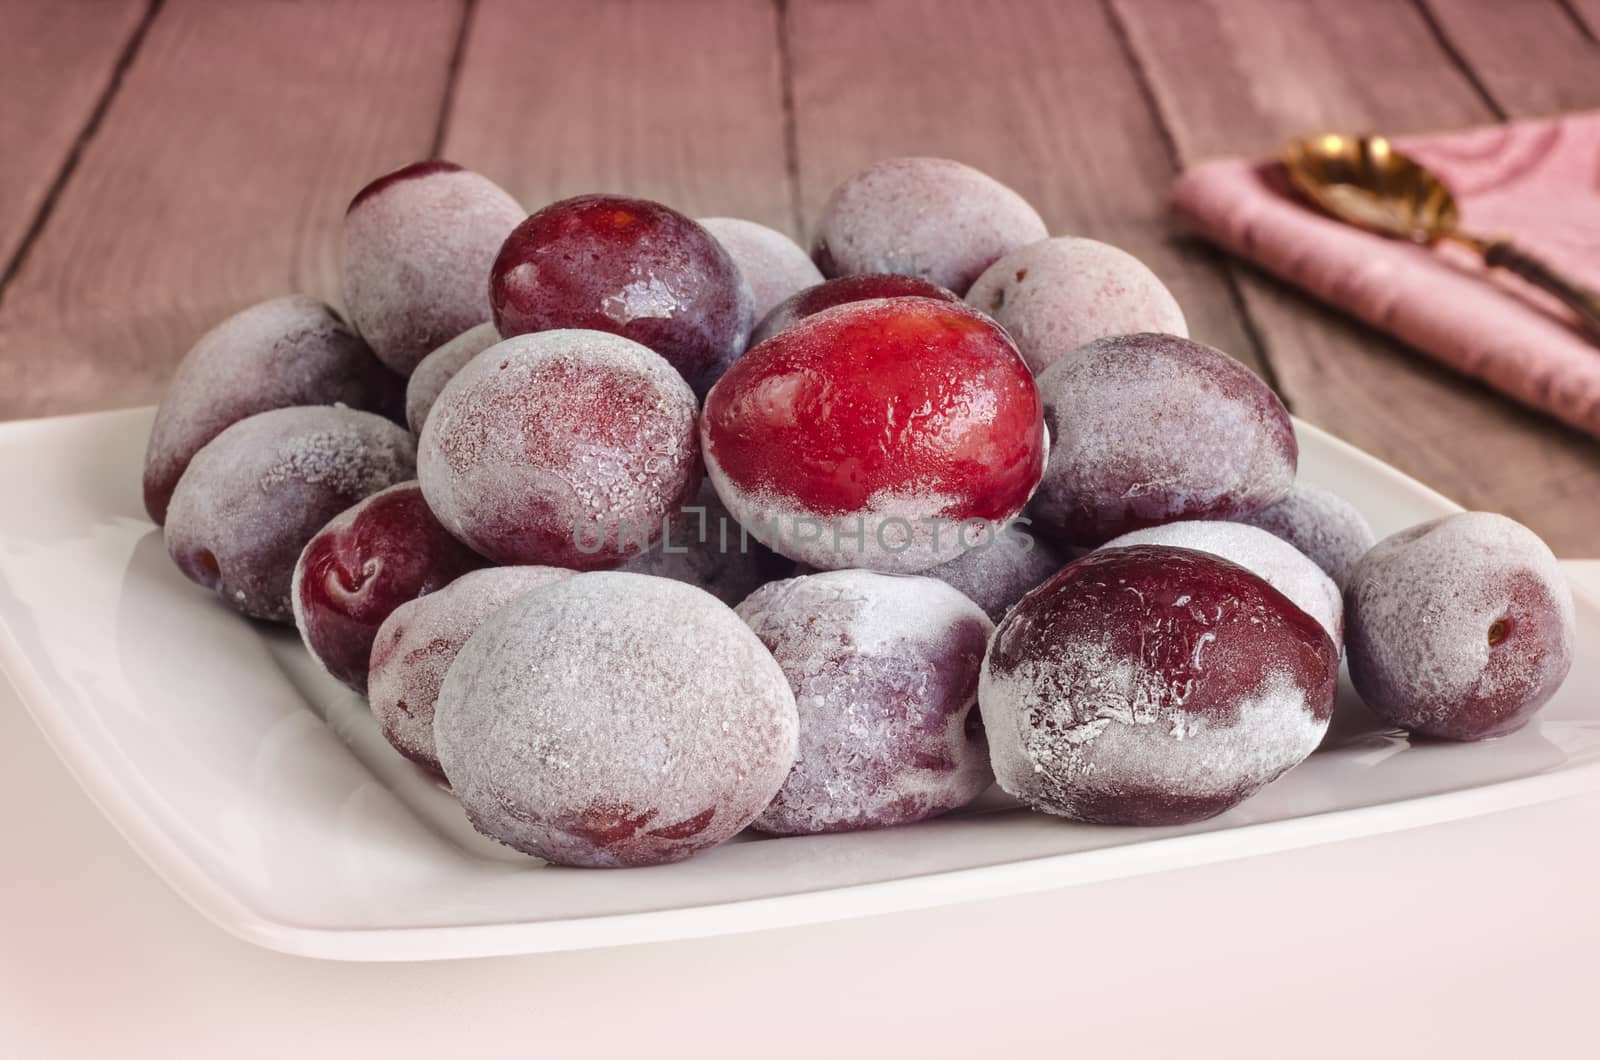 Frozen plums on plate, on wooden background toned in pink